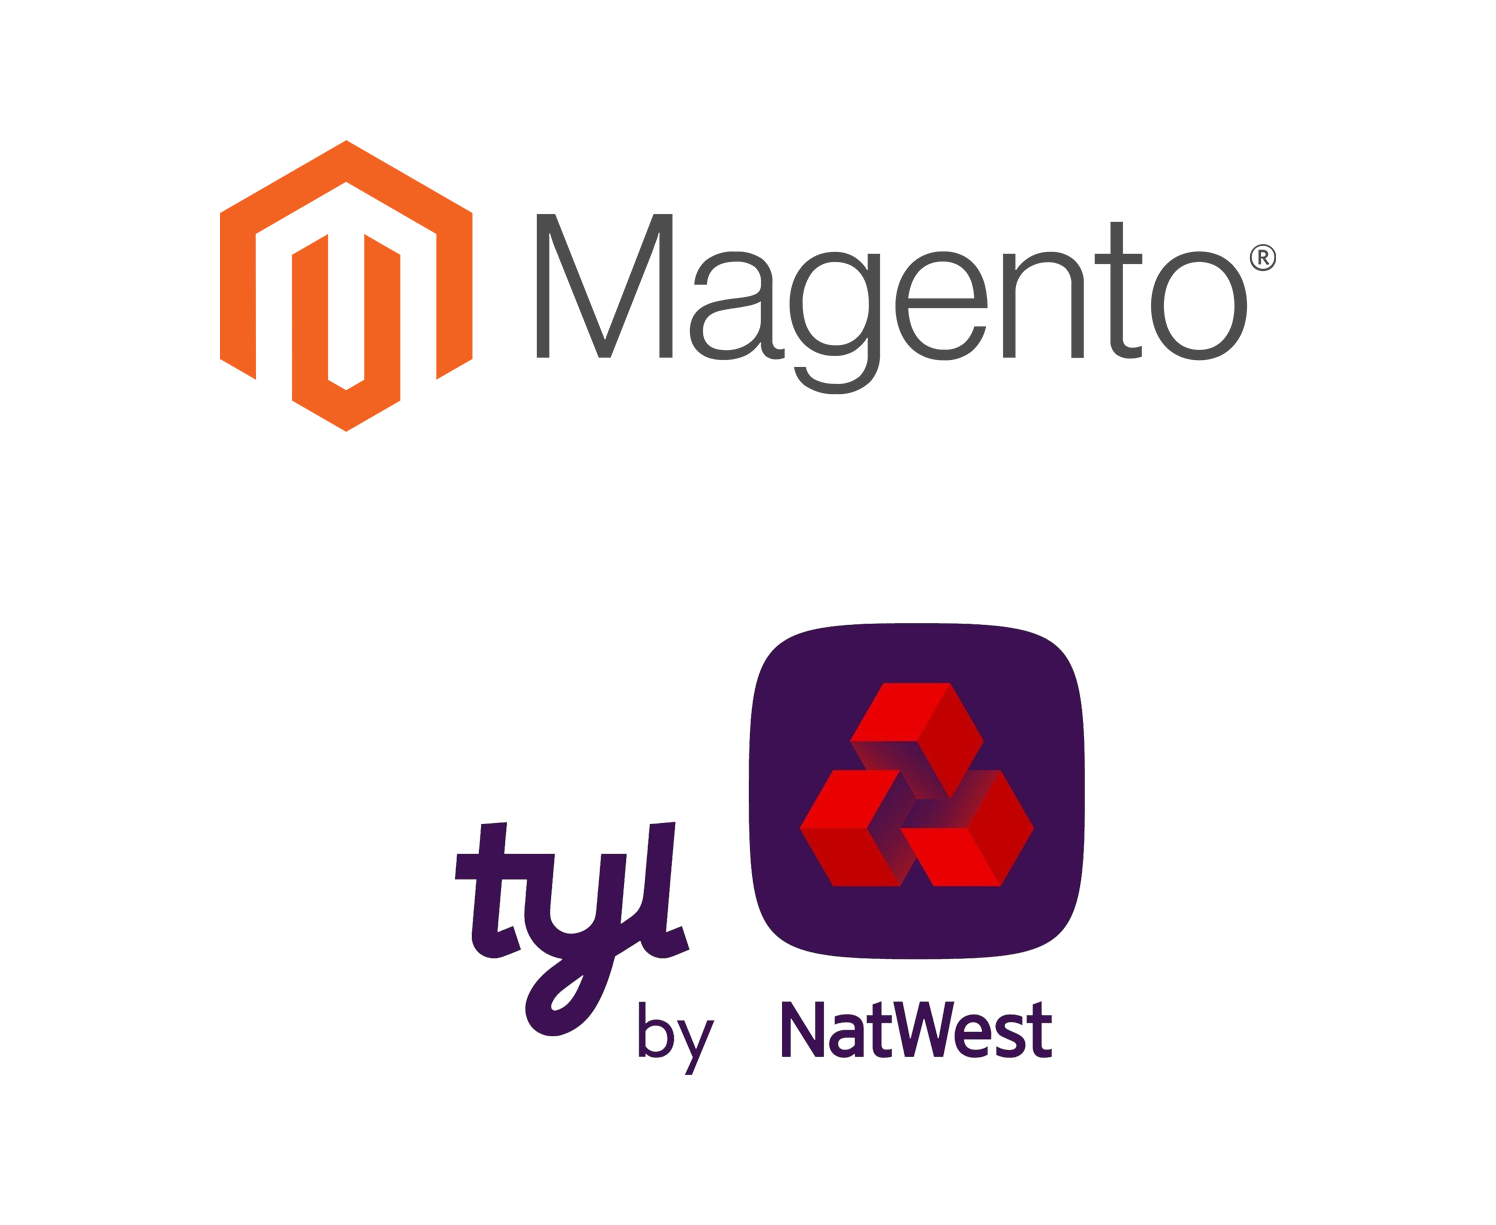 tyl by Natwest and Magento integration logo